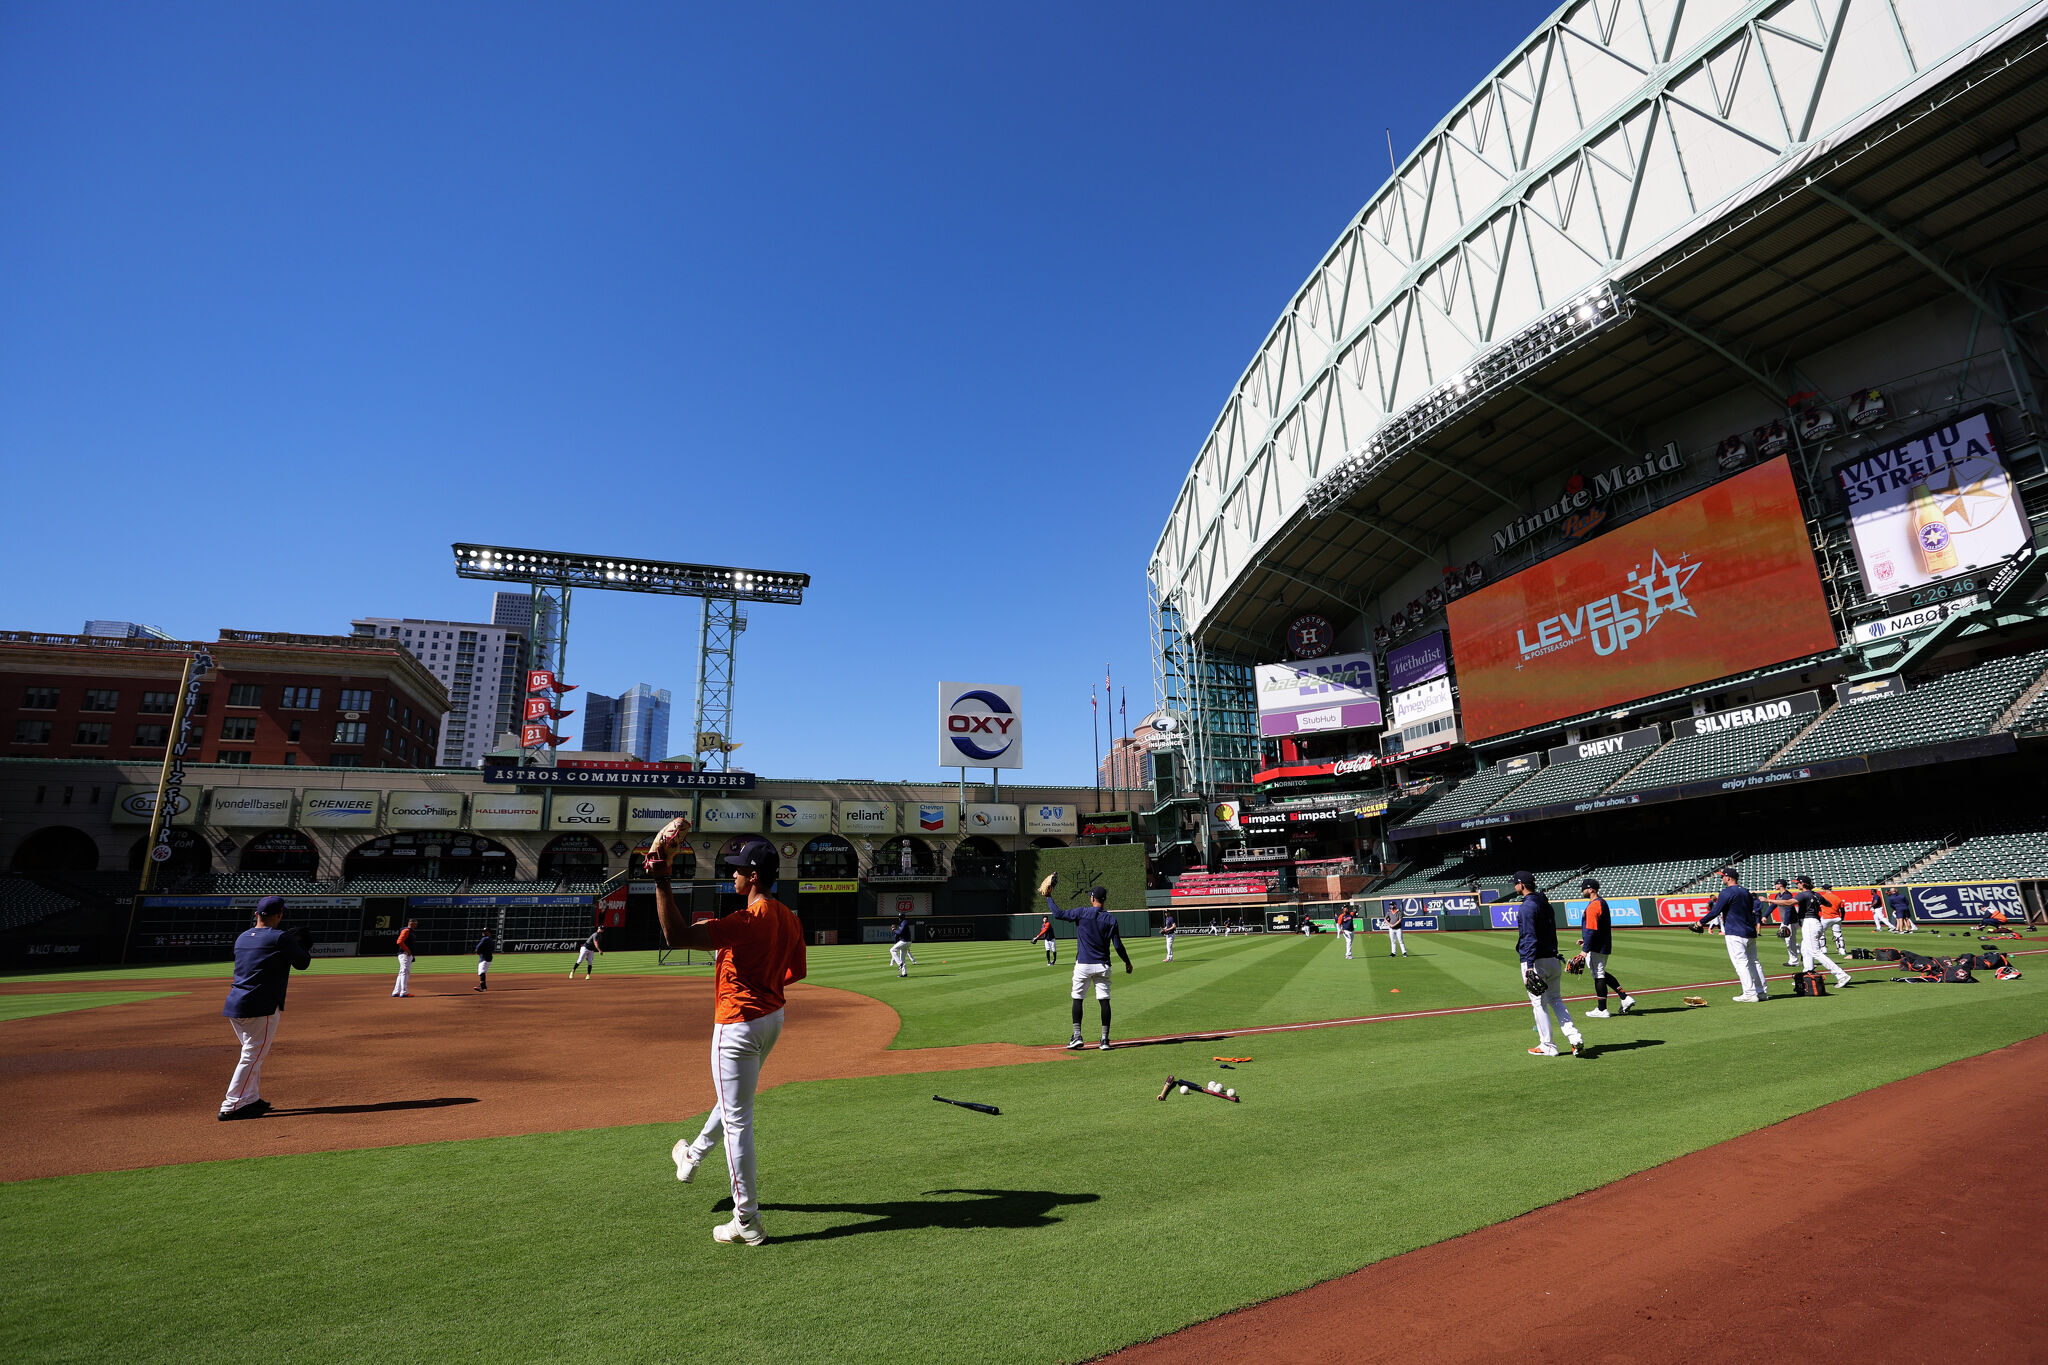 Astros announce decision on Minute Maid Park roof for Game 2